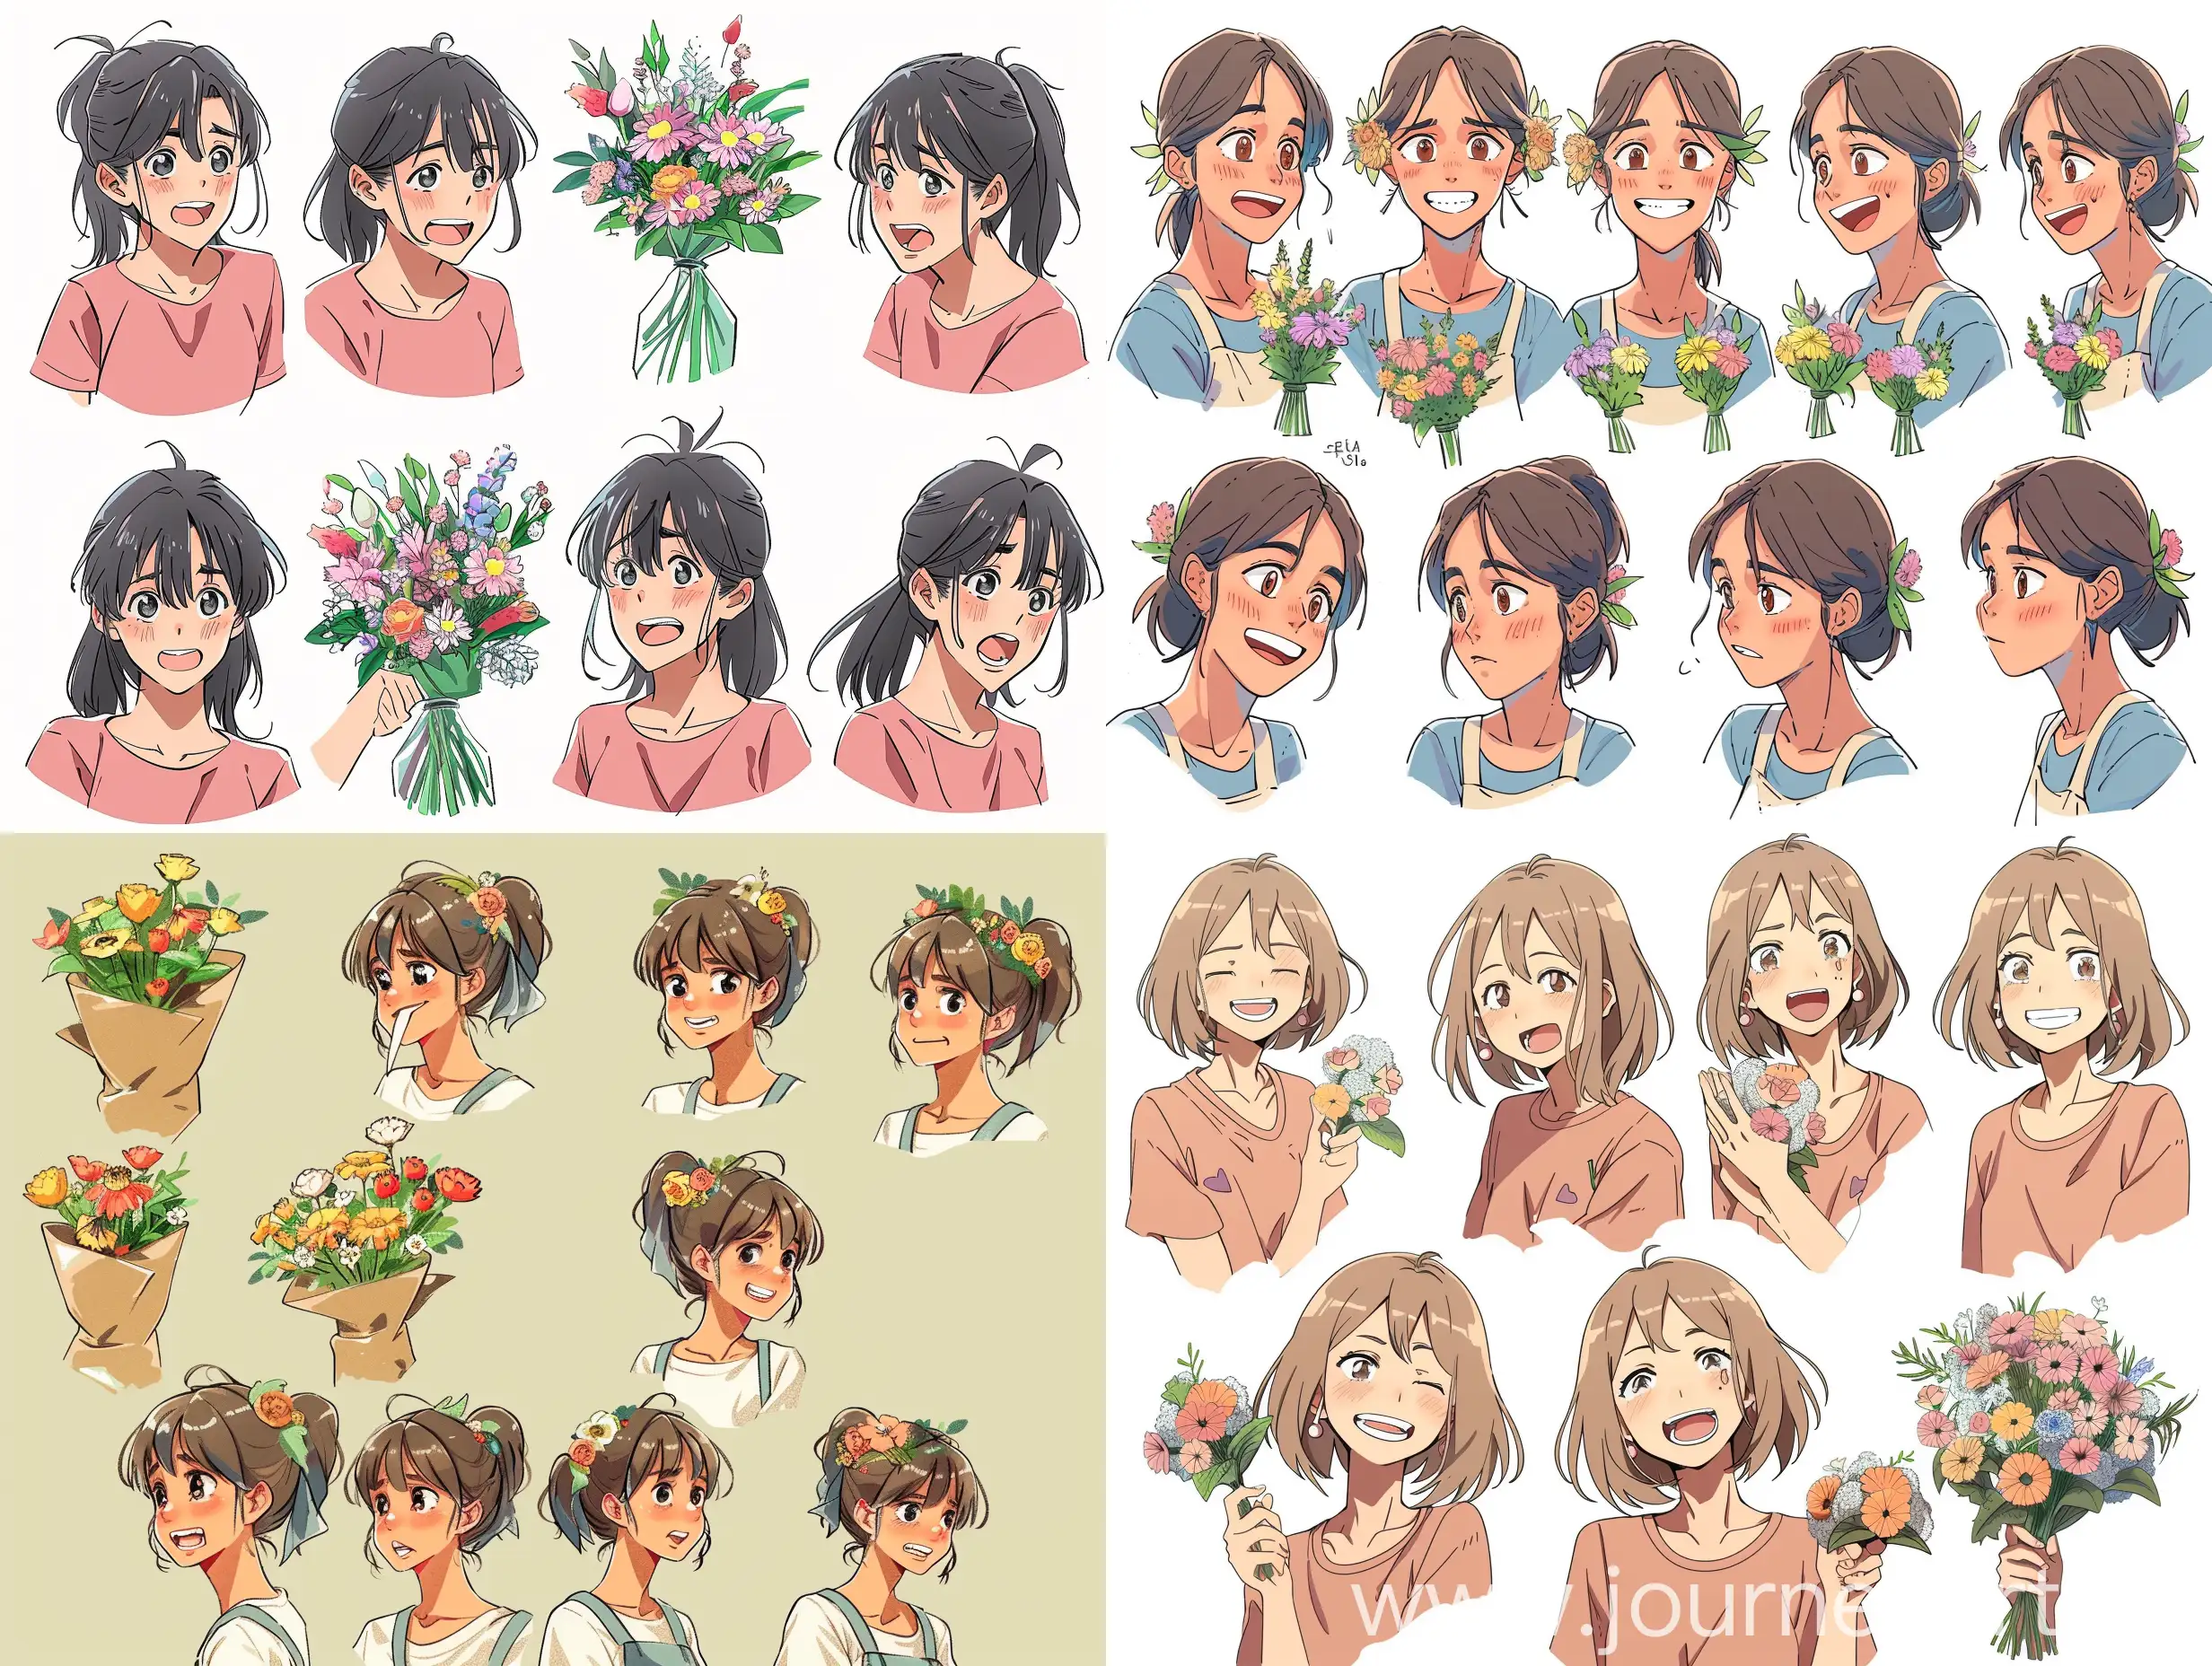 Flower-Arranging-Protagonist-Expressive-Manga-Character-Design-in-SemiRealistic-Style